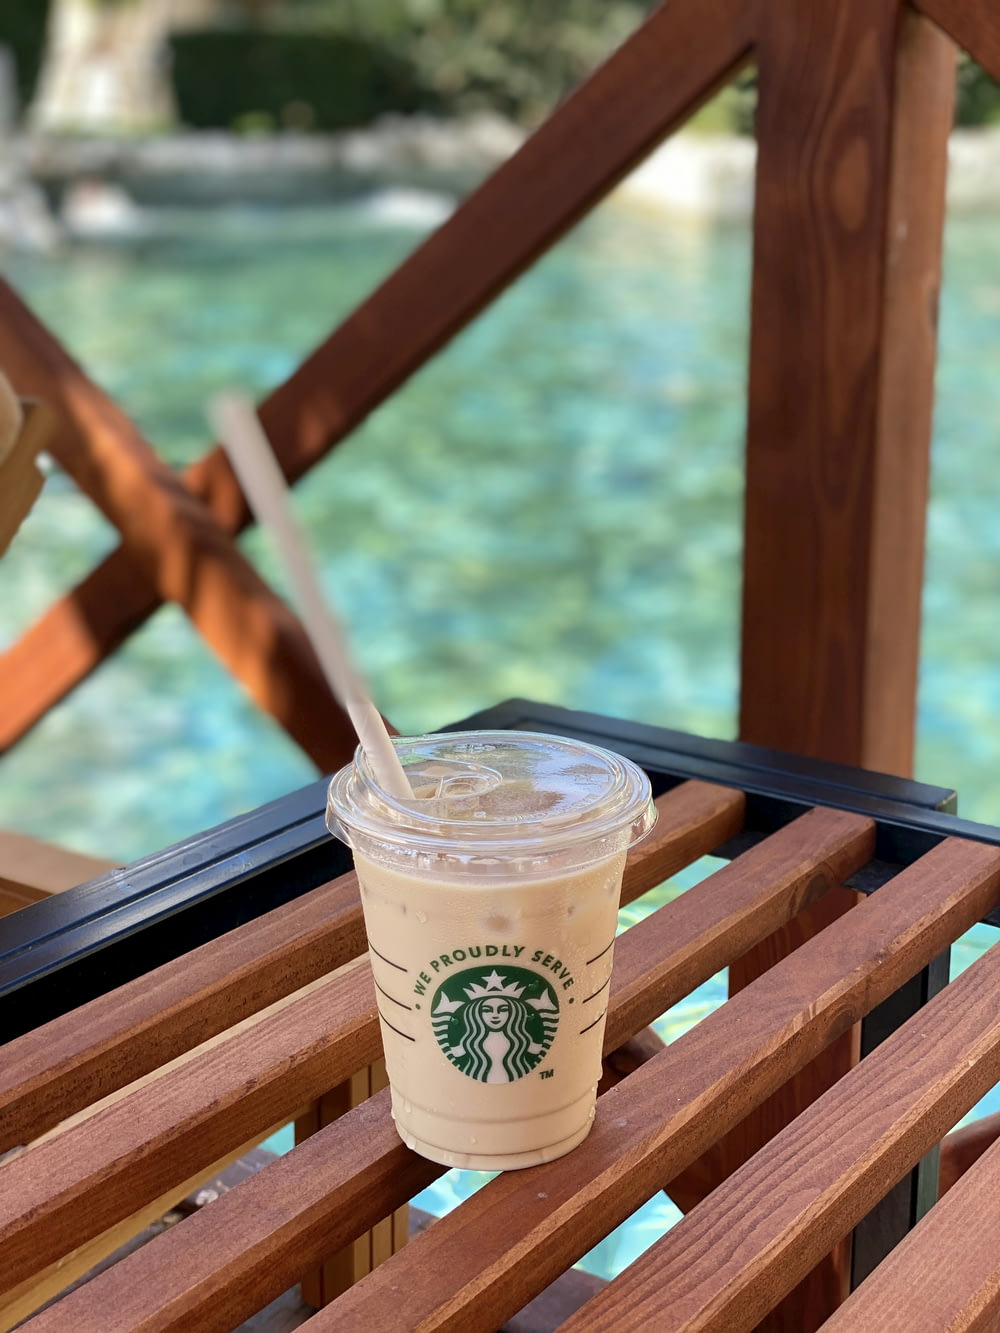 a cup of starbucks coffee sitting on a wooden bench